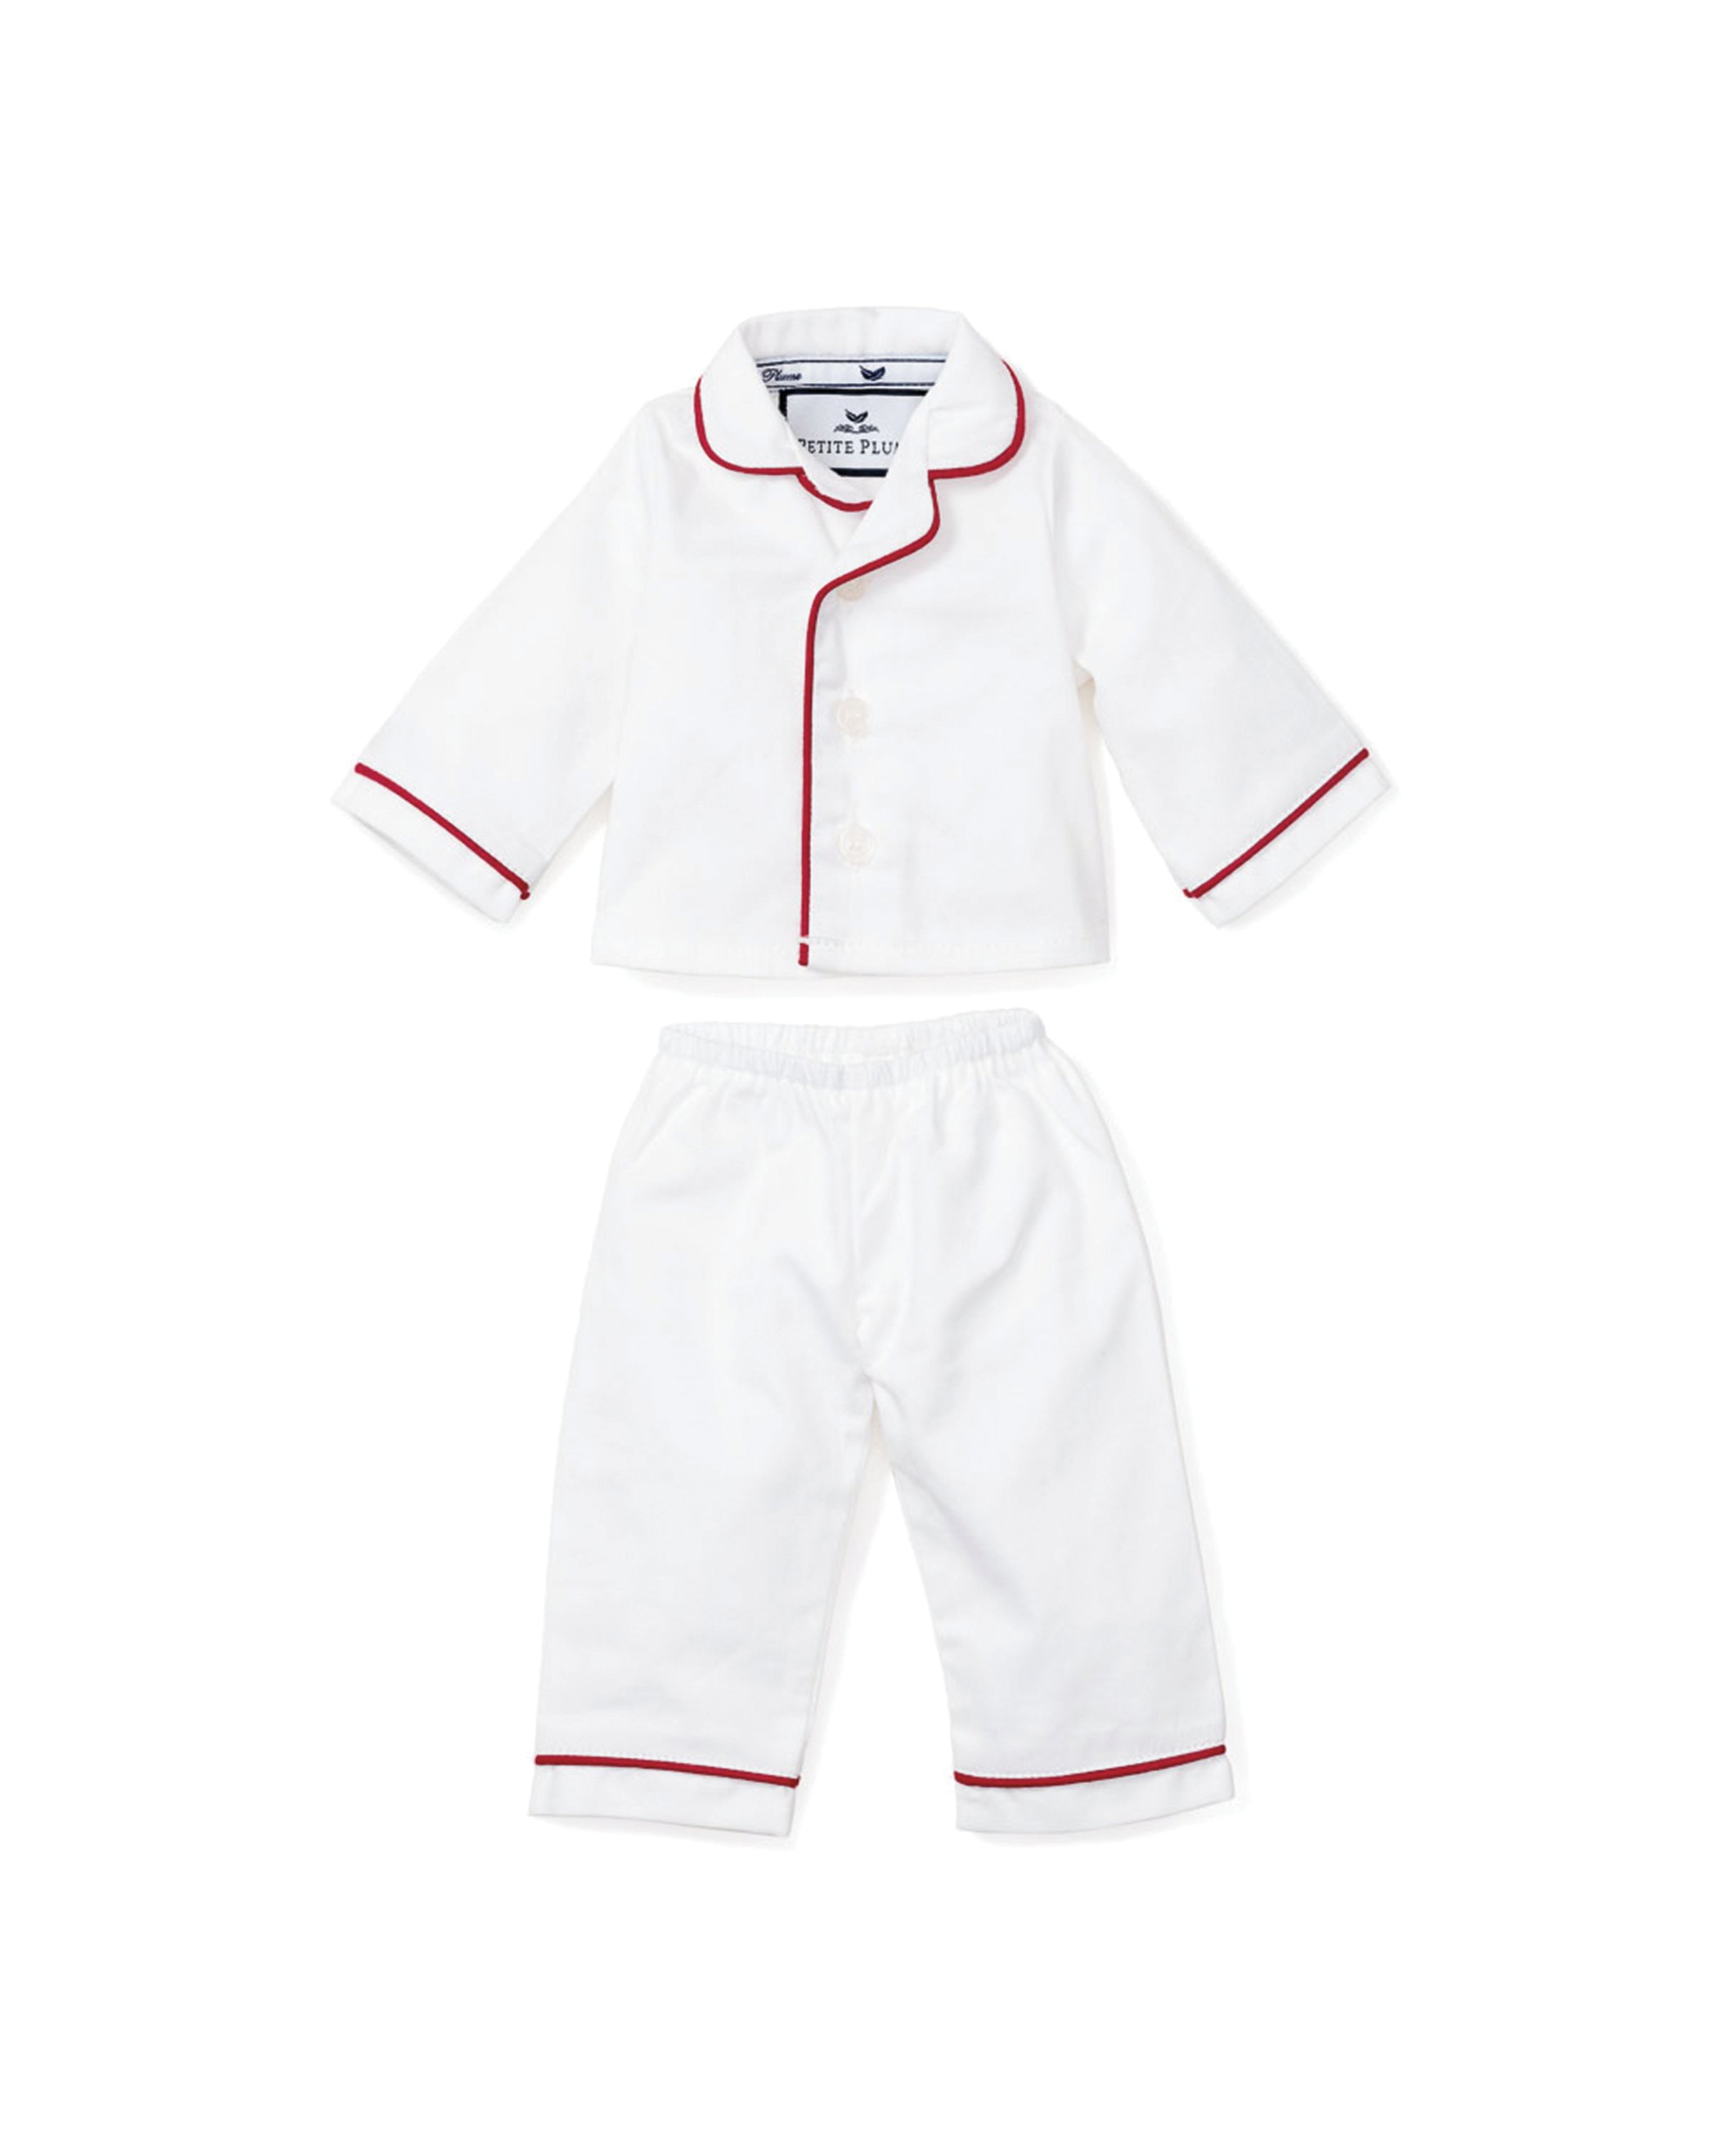 White Doll Pajamas with Red Piping